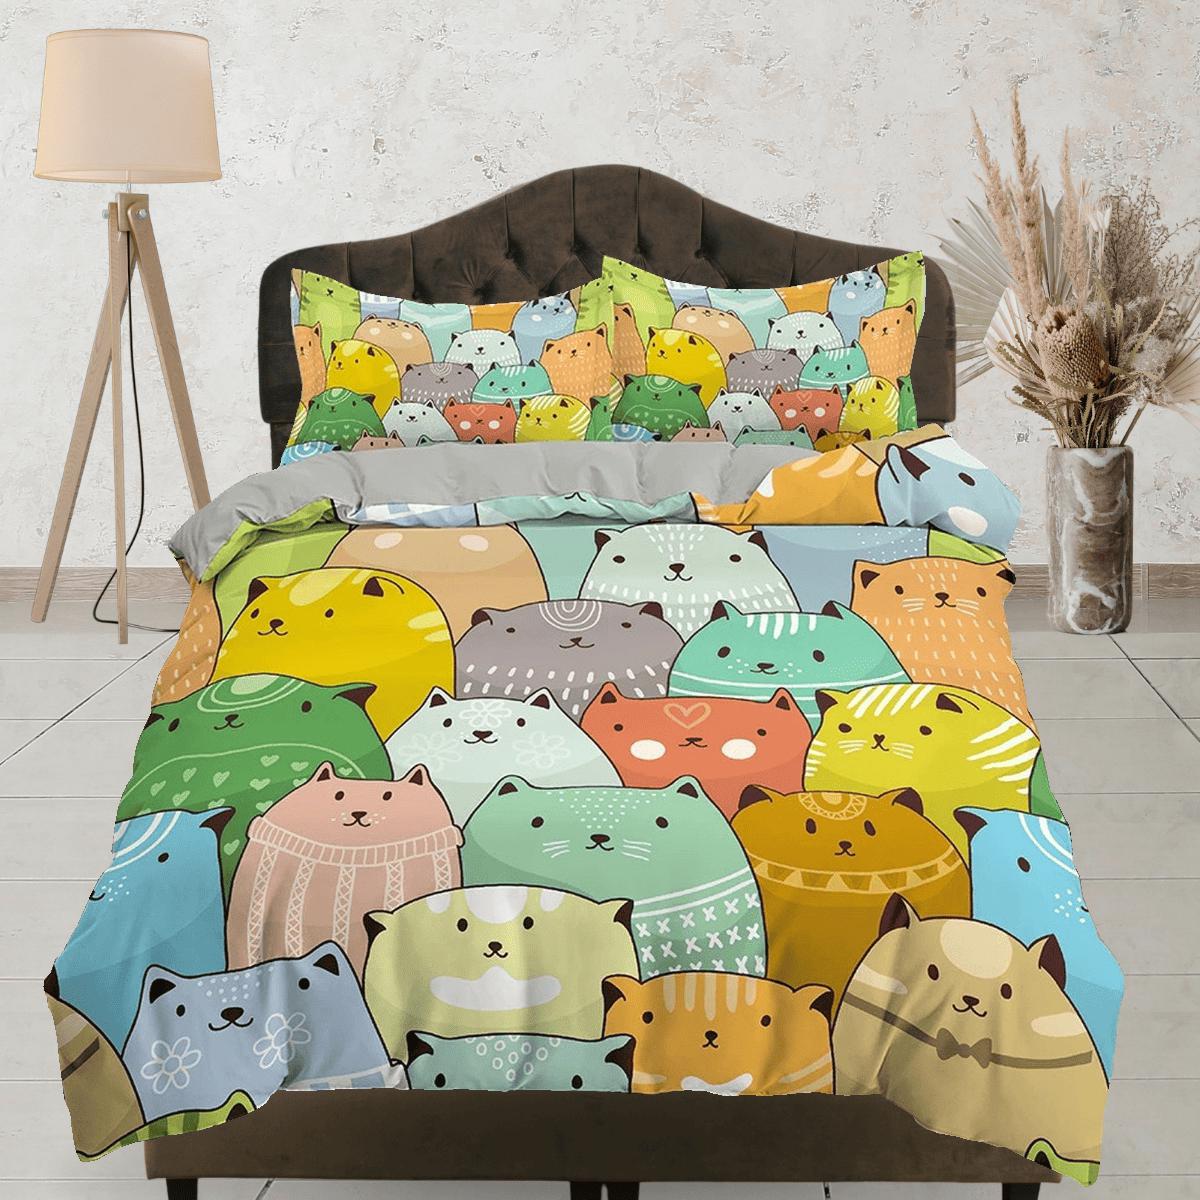 daintyduvet Colorful Fat Cats Toddler Bedding, Unique Duvet Cover for Nursery Kids, Crib Bedding & Pillowcase, Baby Zipper Bedding, King Queen Full Twin